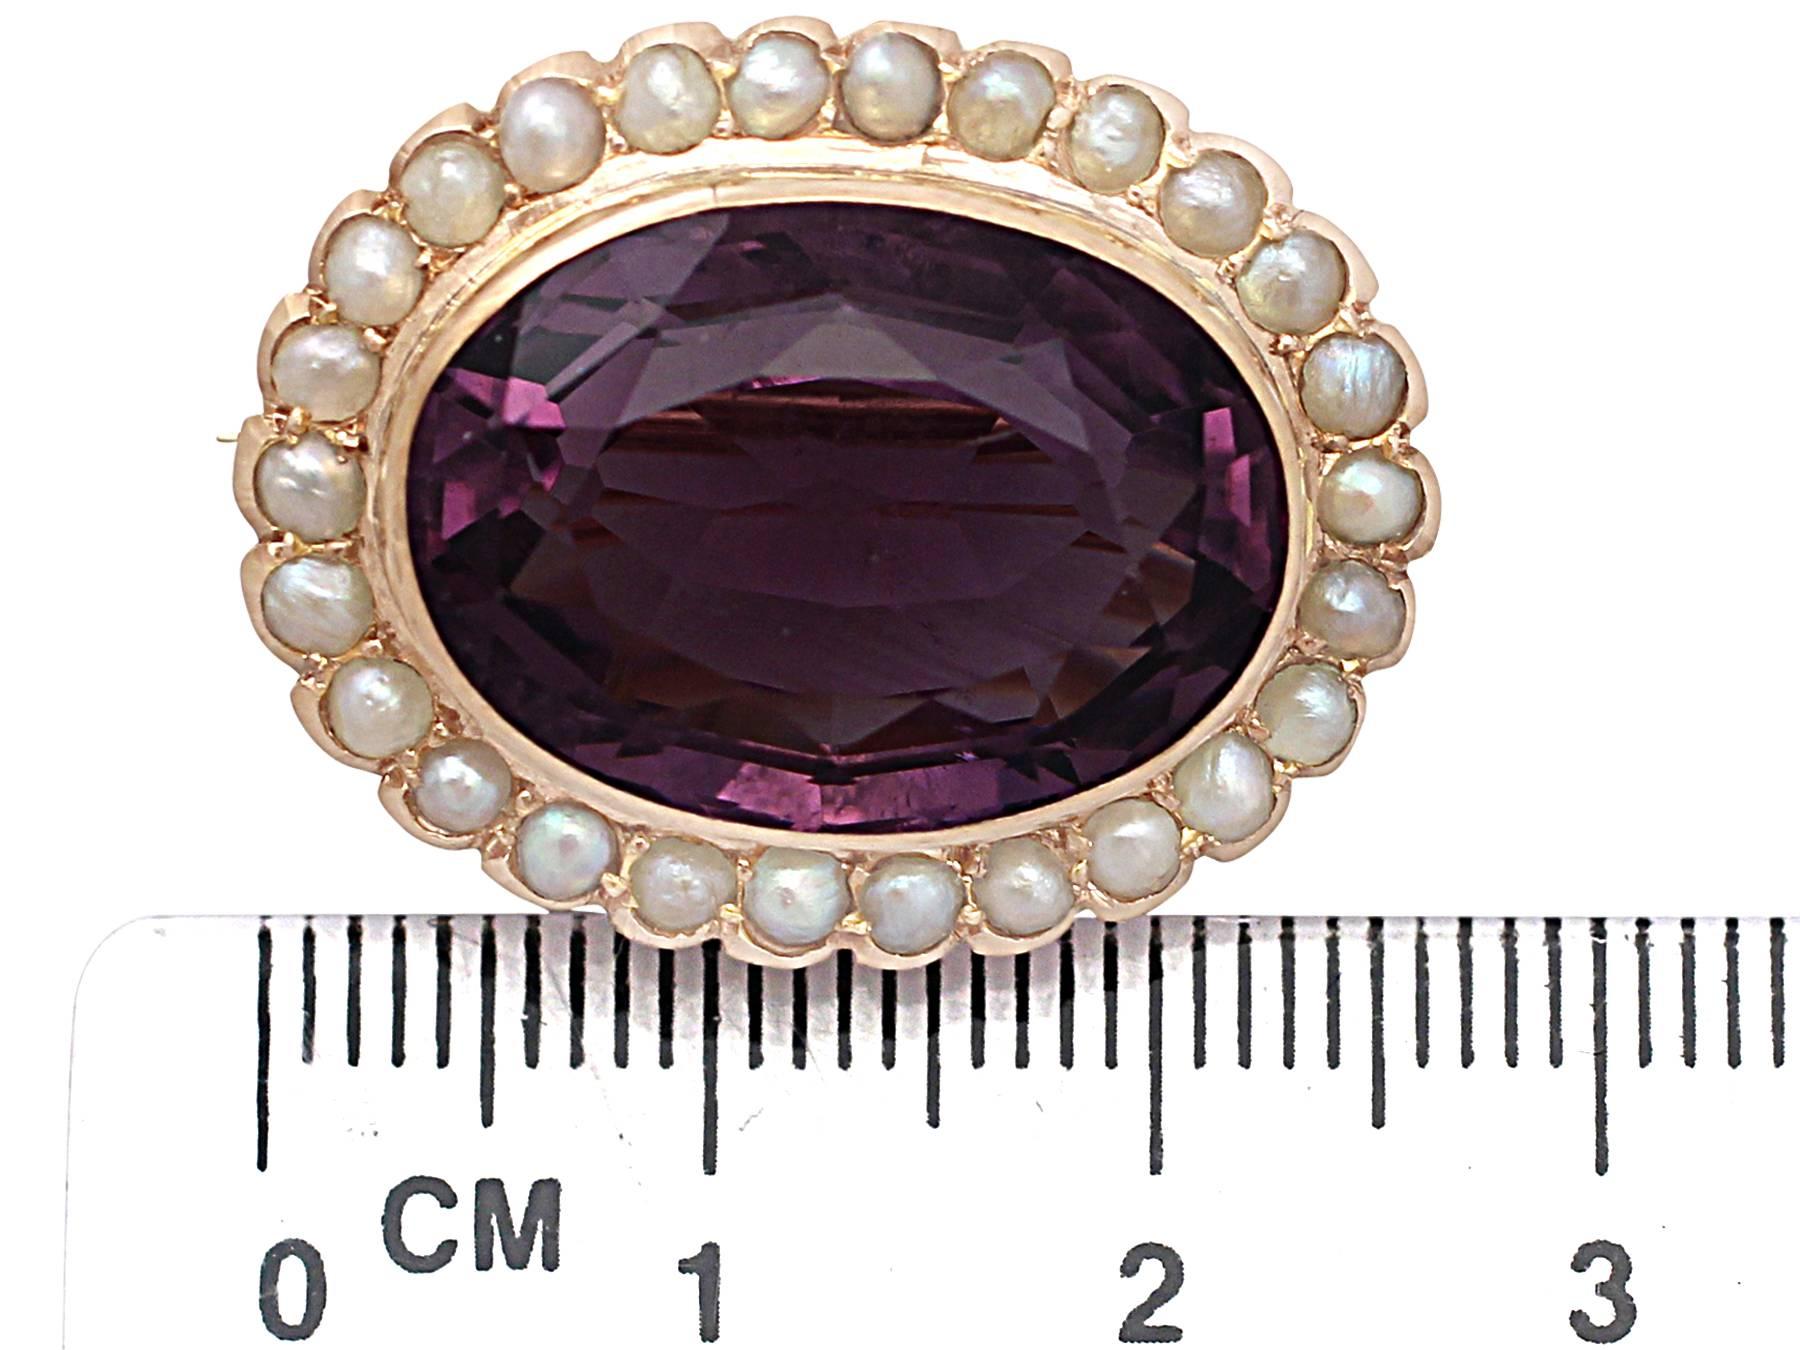 17.05Ct Amethyst and Pearl 9k Yellow Gold Brooch - Antique Edwardian 2